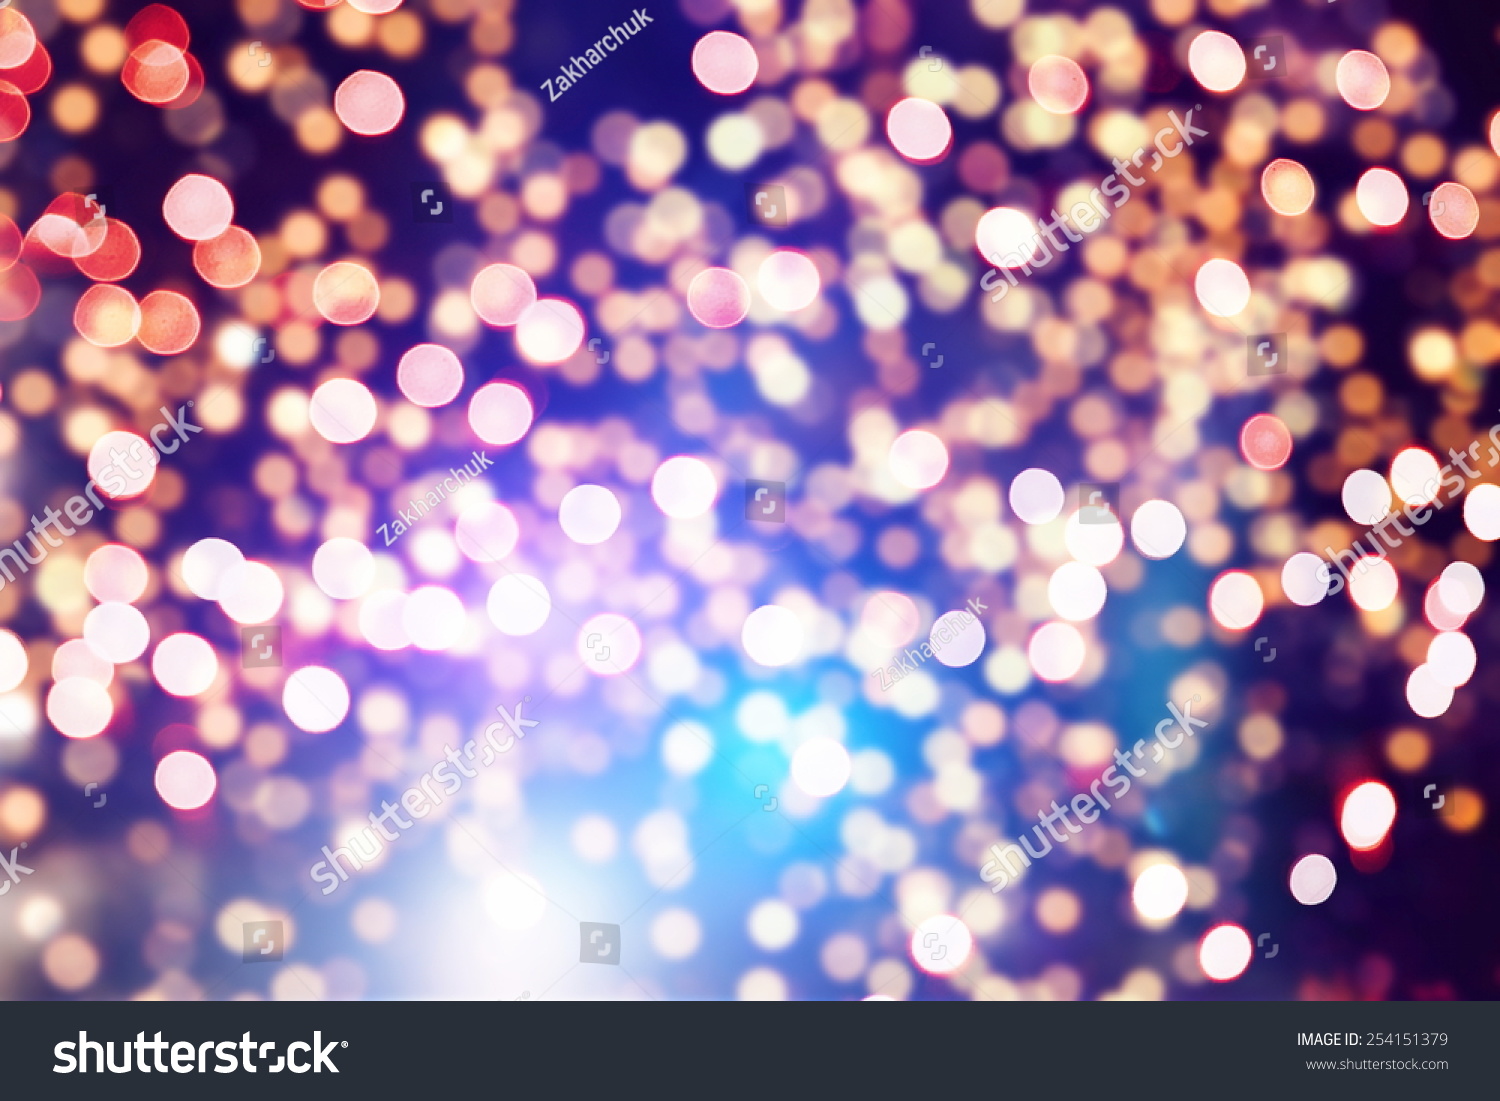 Abstract Texture, Light Bokeh Background Stock Photo 254151379 ...